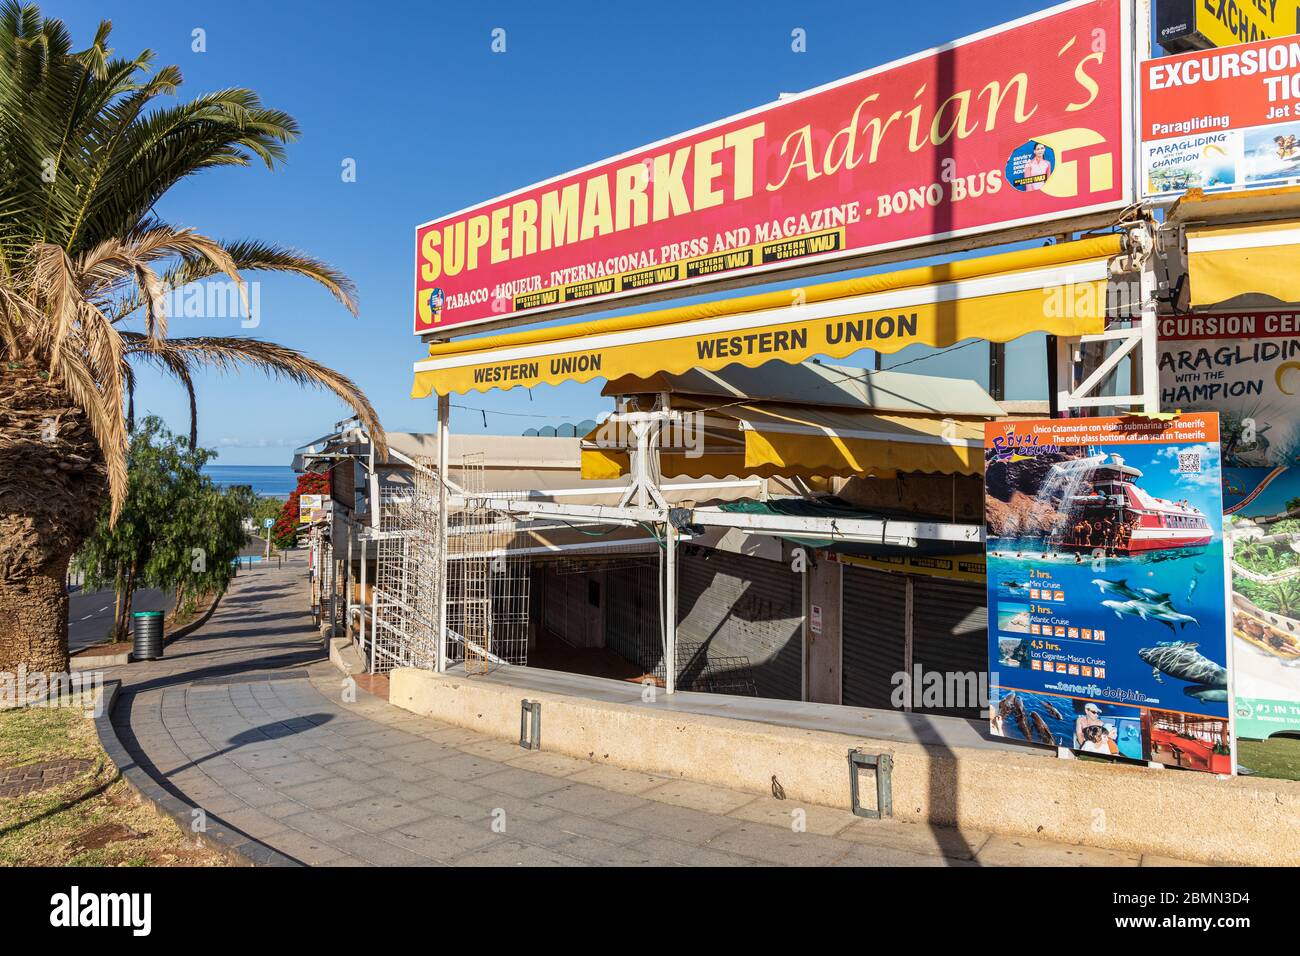 Closed businesses and shops in Torviscas during the covid 19 lockdown in the tourist resort area of Costa Adeje, Tenerife, Canary Islands, Spain Stock Photo